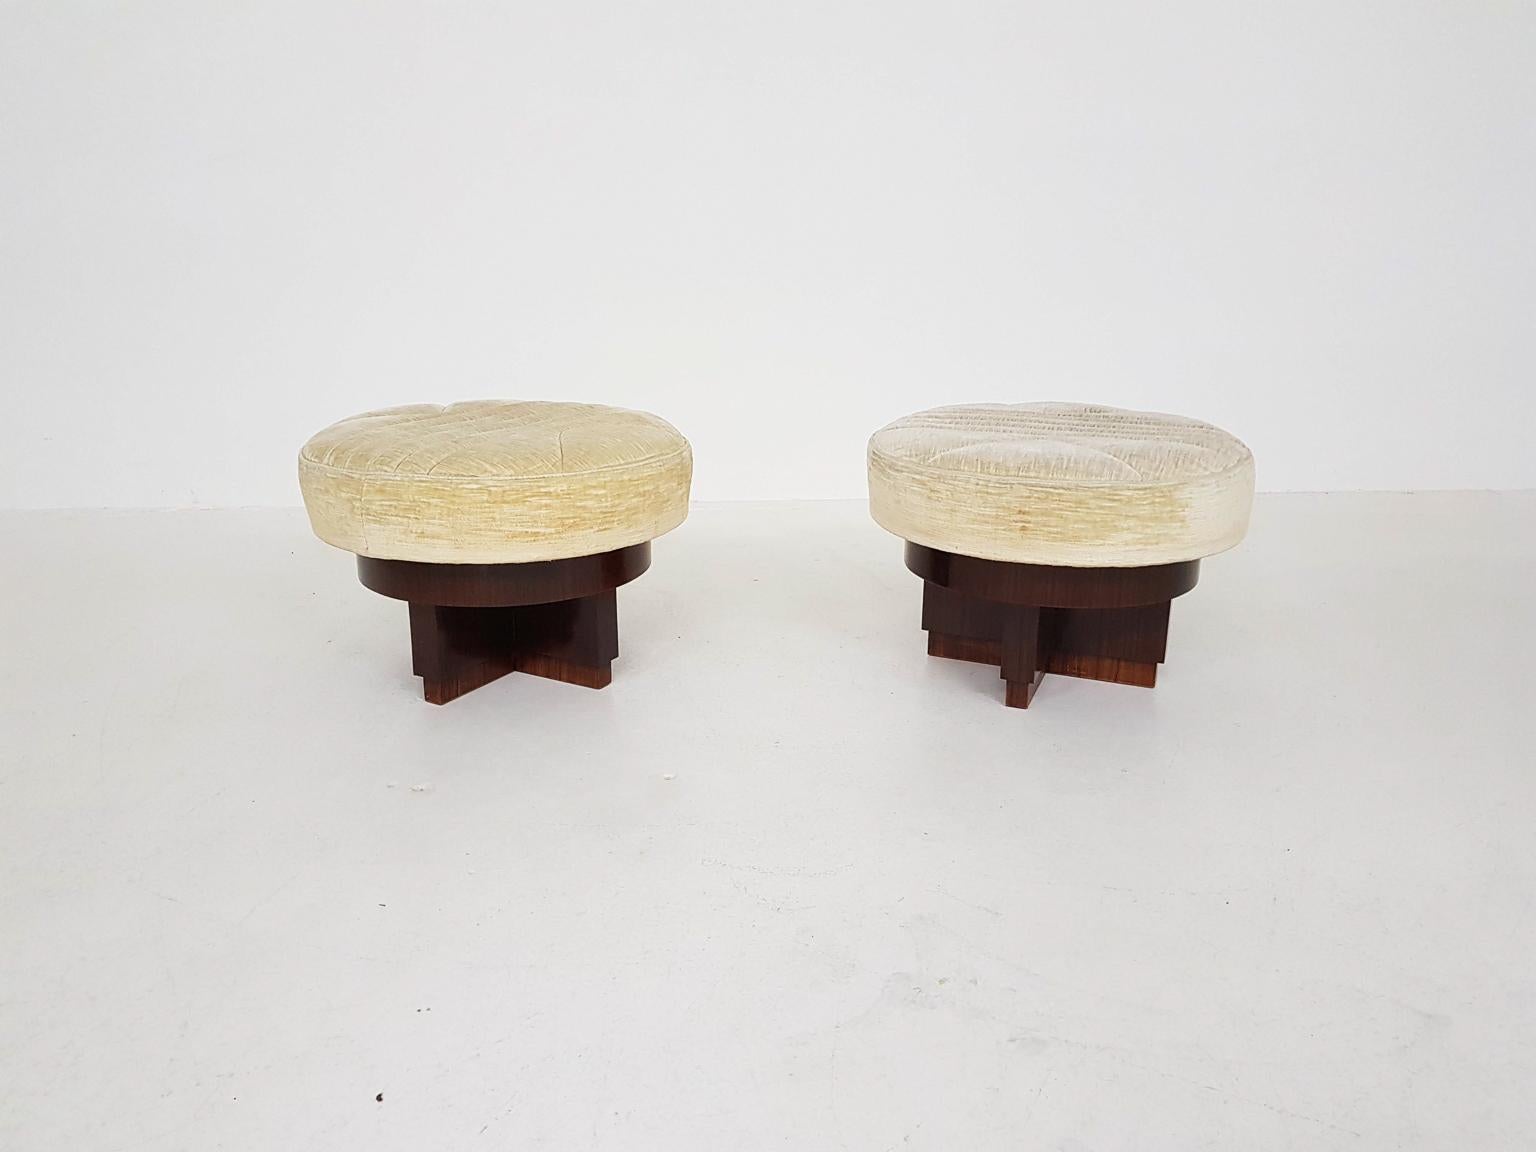 A pair of geometric, cross shaped wooden ottomans, poufs or stools from 1930s. Made in Italy.

The ottoman has a comfortable round cushion and a cross shaped base consisting of different layers of wood. Those layers create some depth to the